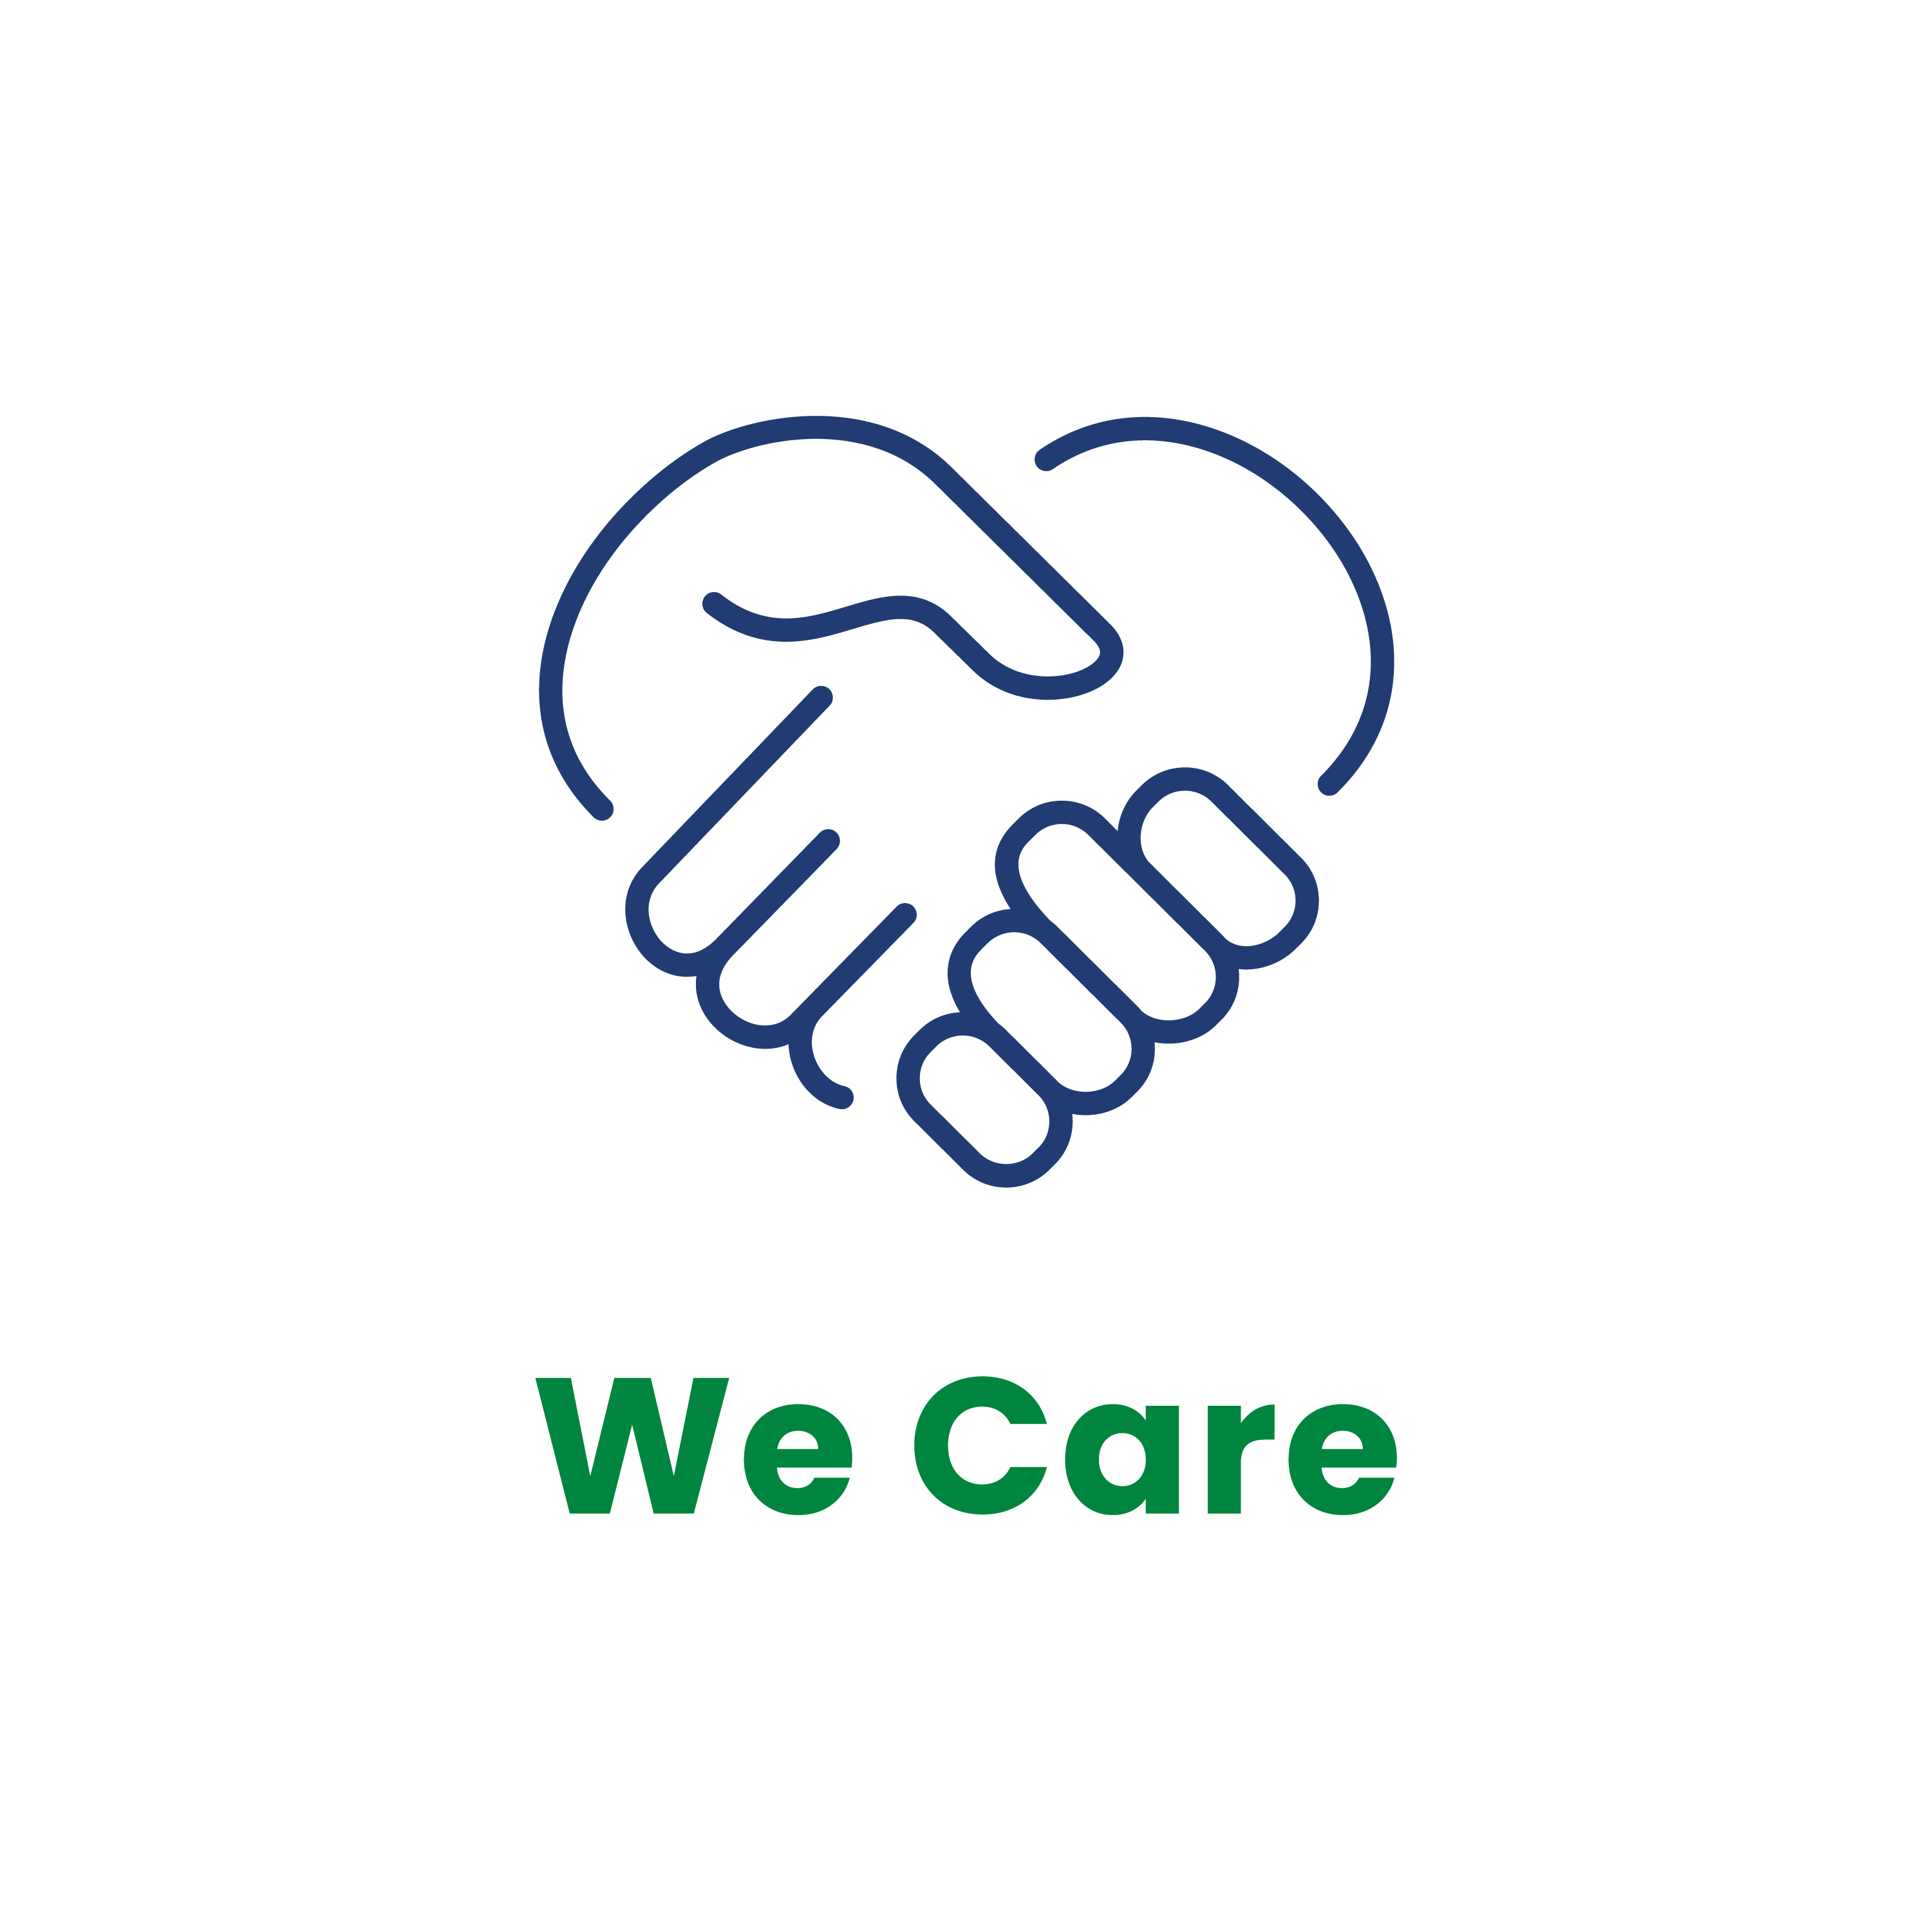 About the We Care Commitment - We Care